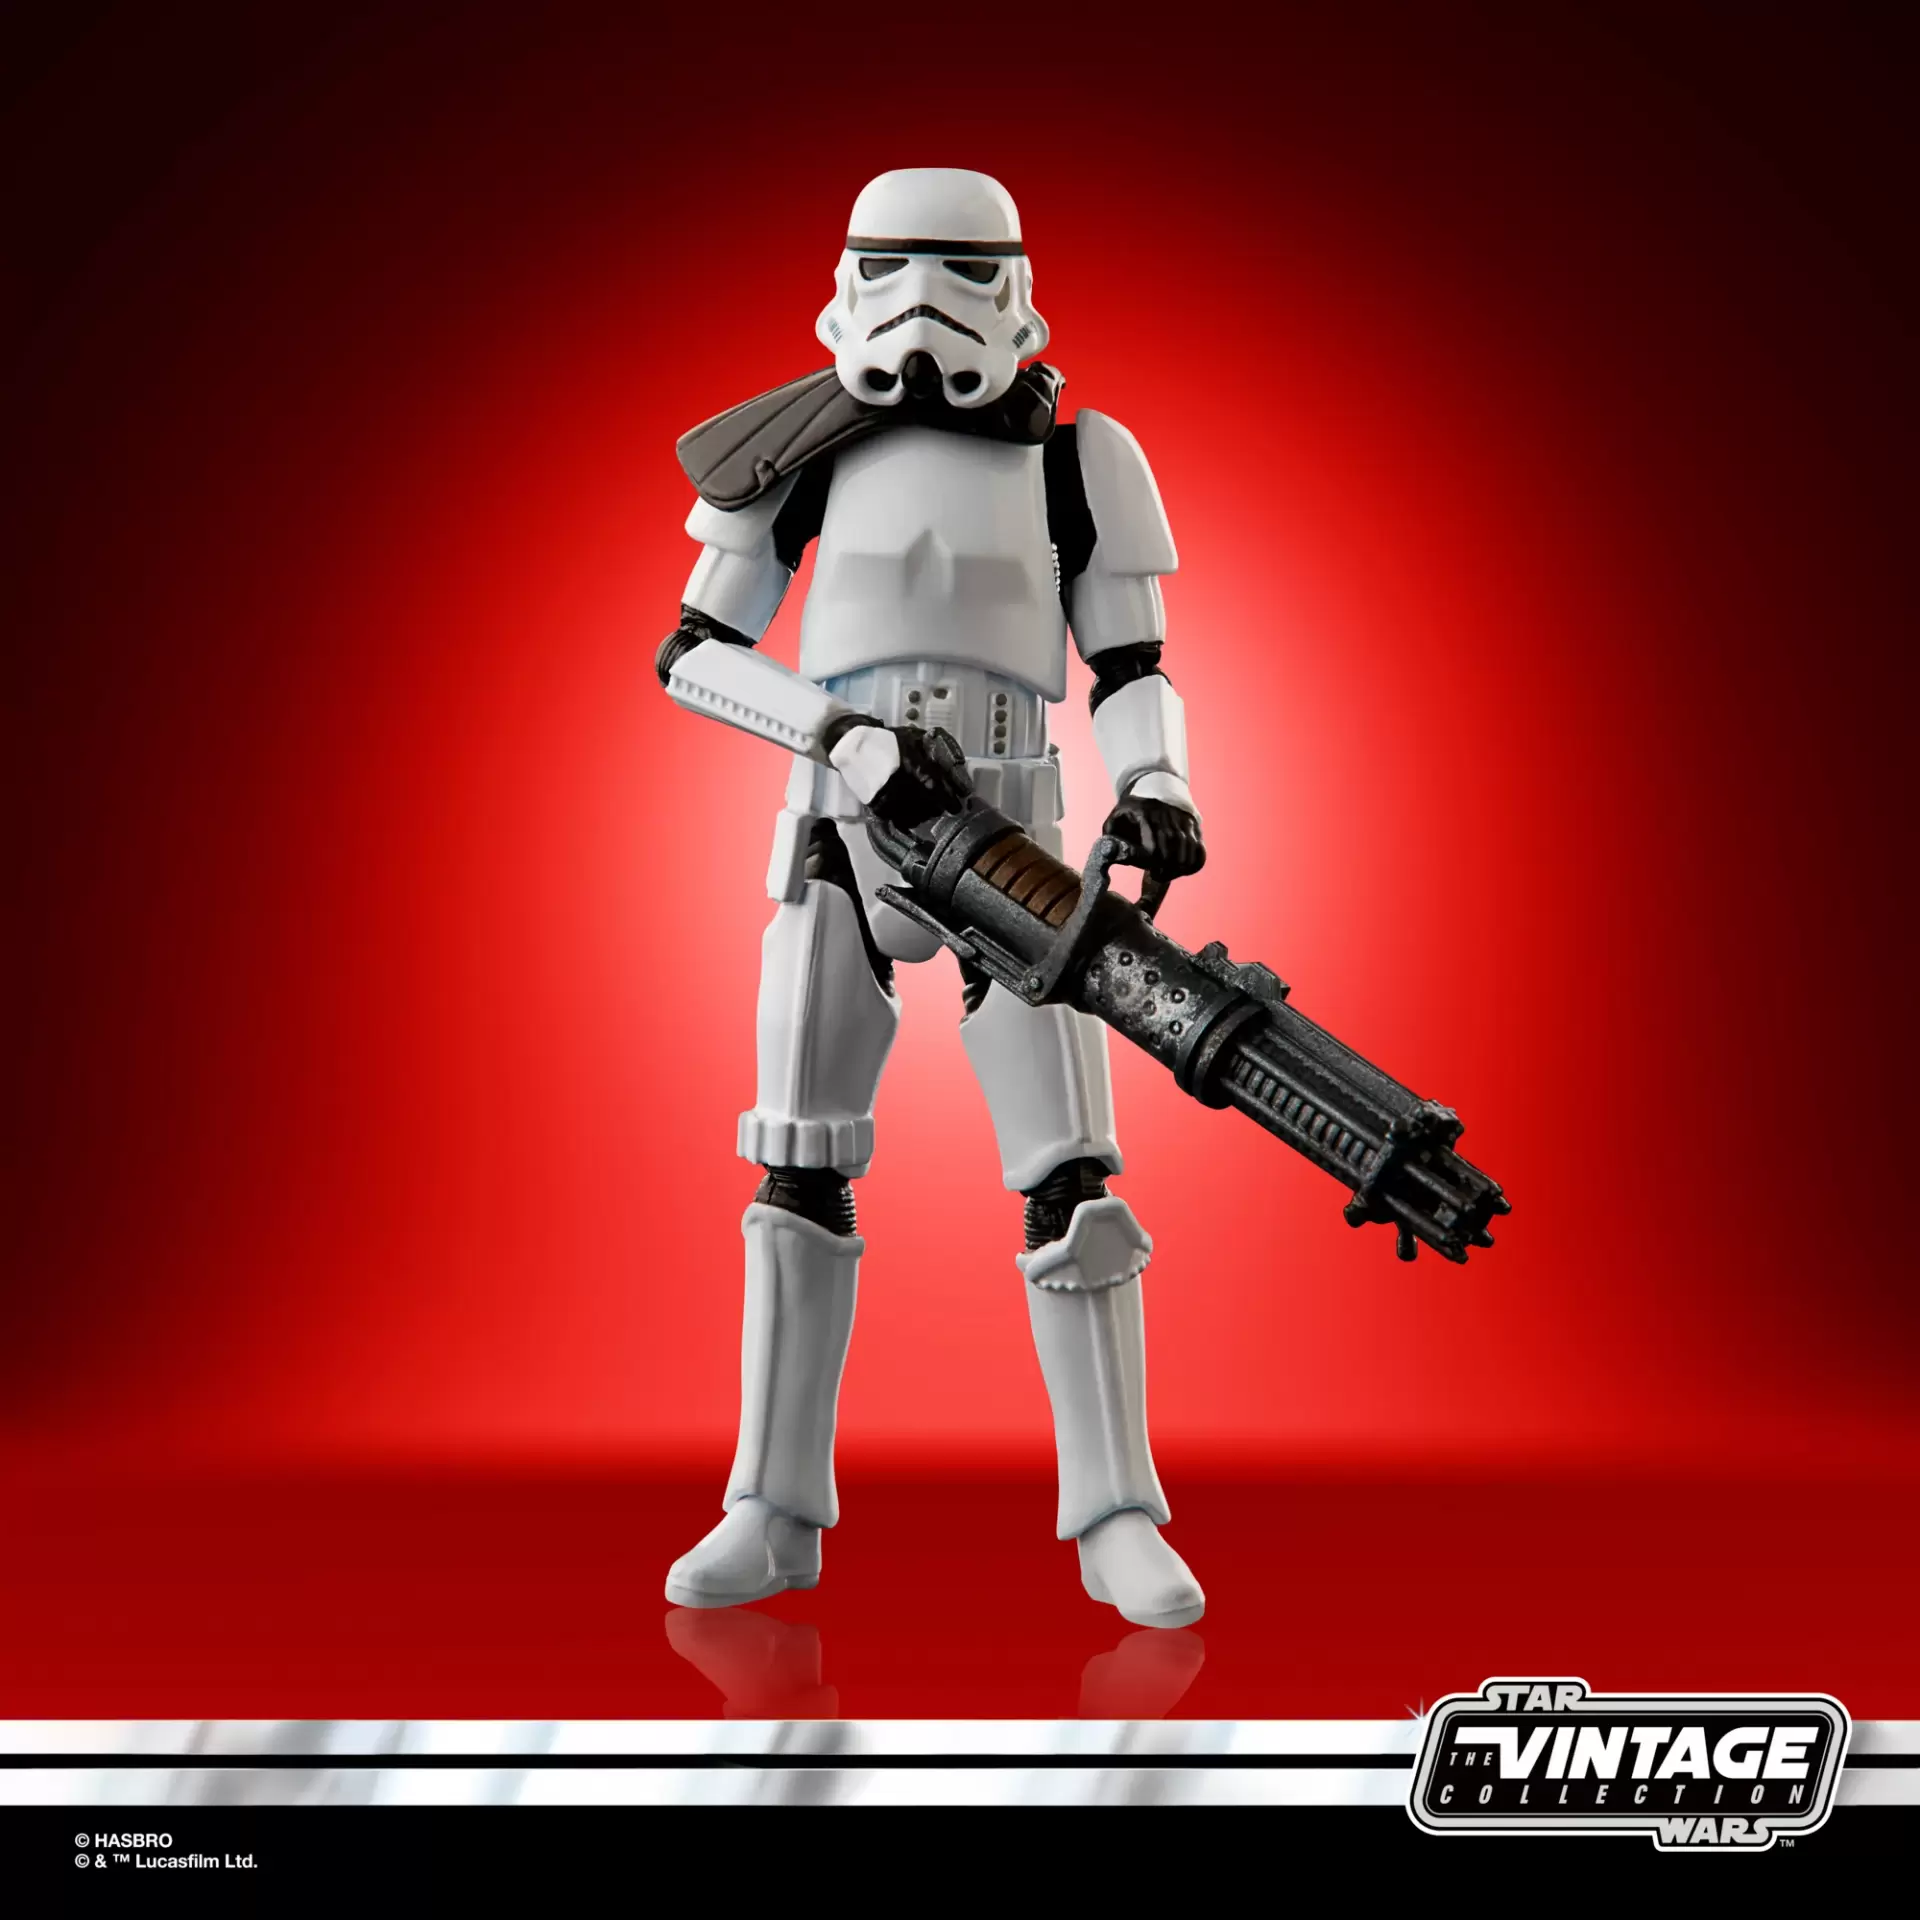 Star wars the vintage collection gaming greats heavy assault stormtrooper jawascave